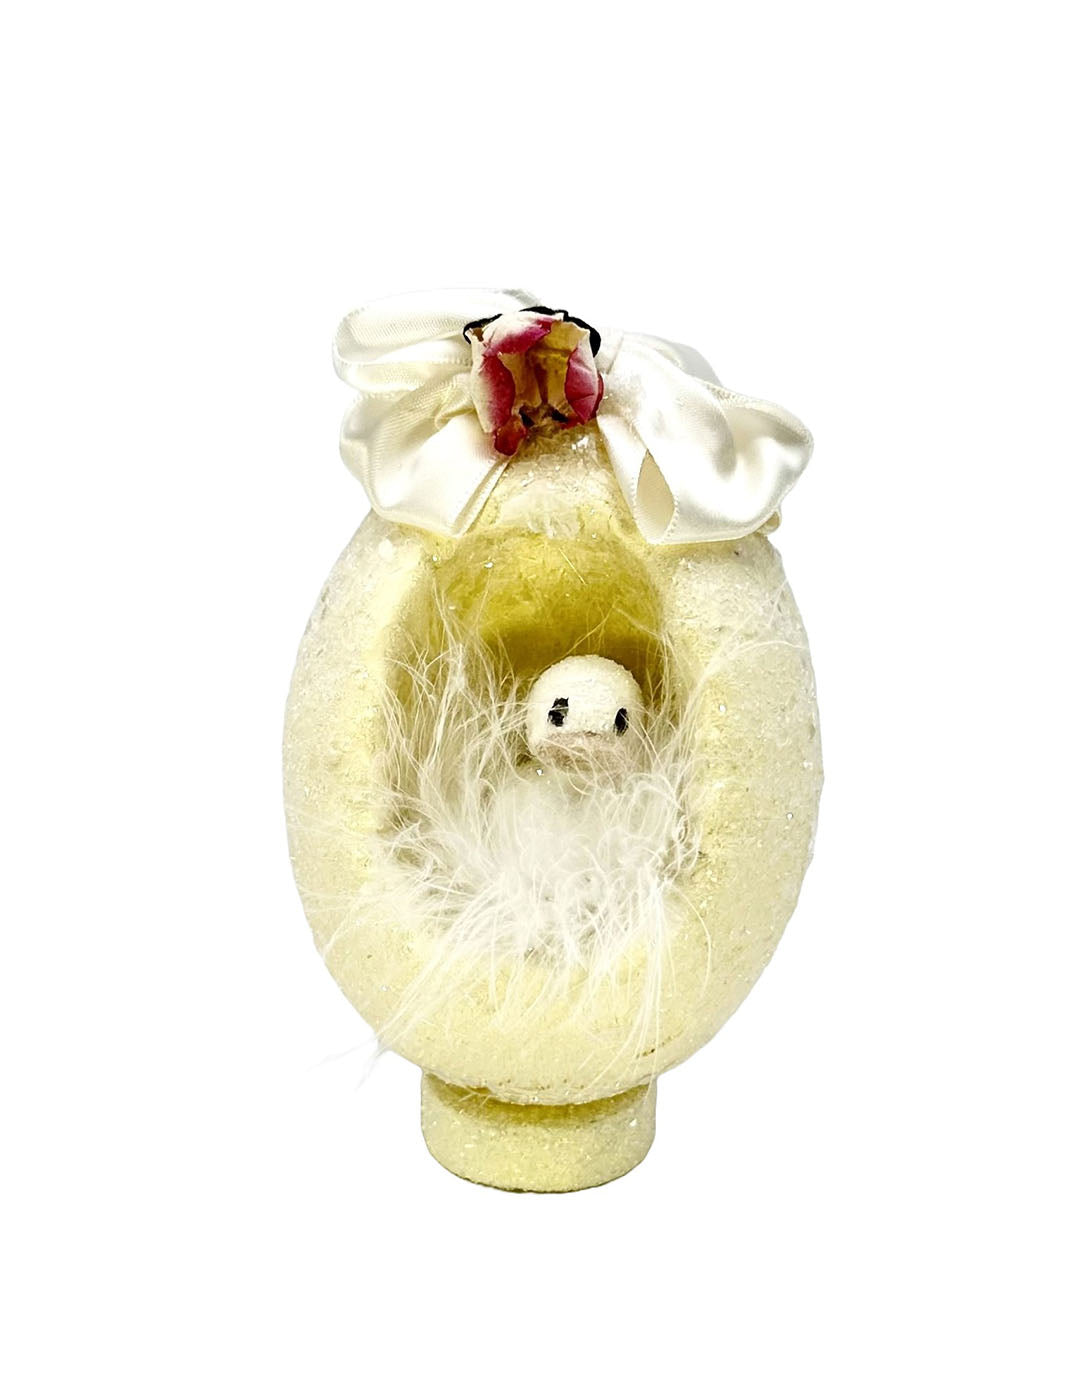 Peek-A-Boo "Sugared" Egg with Duckling - Lemon